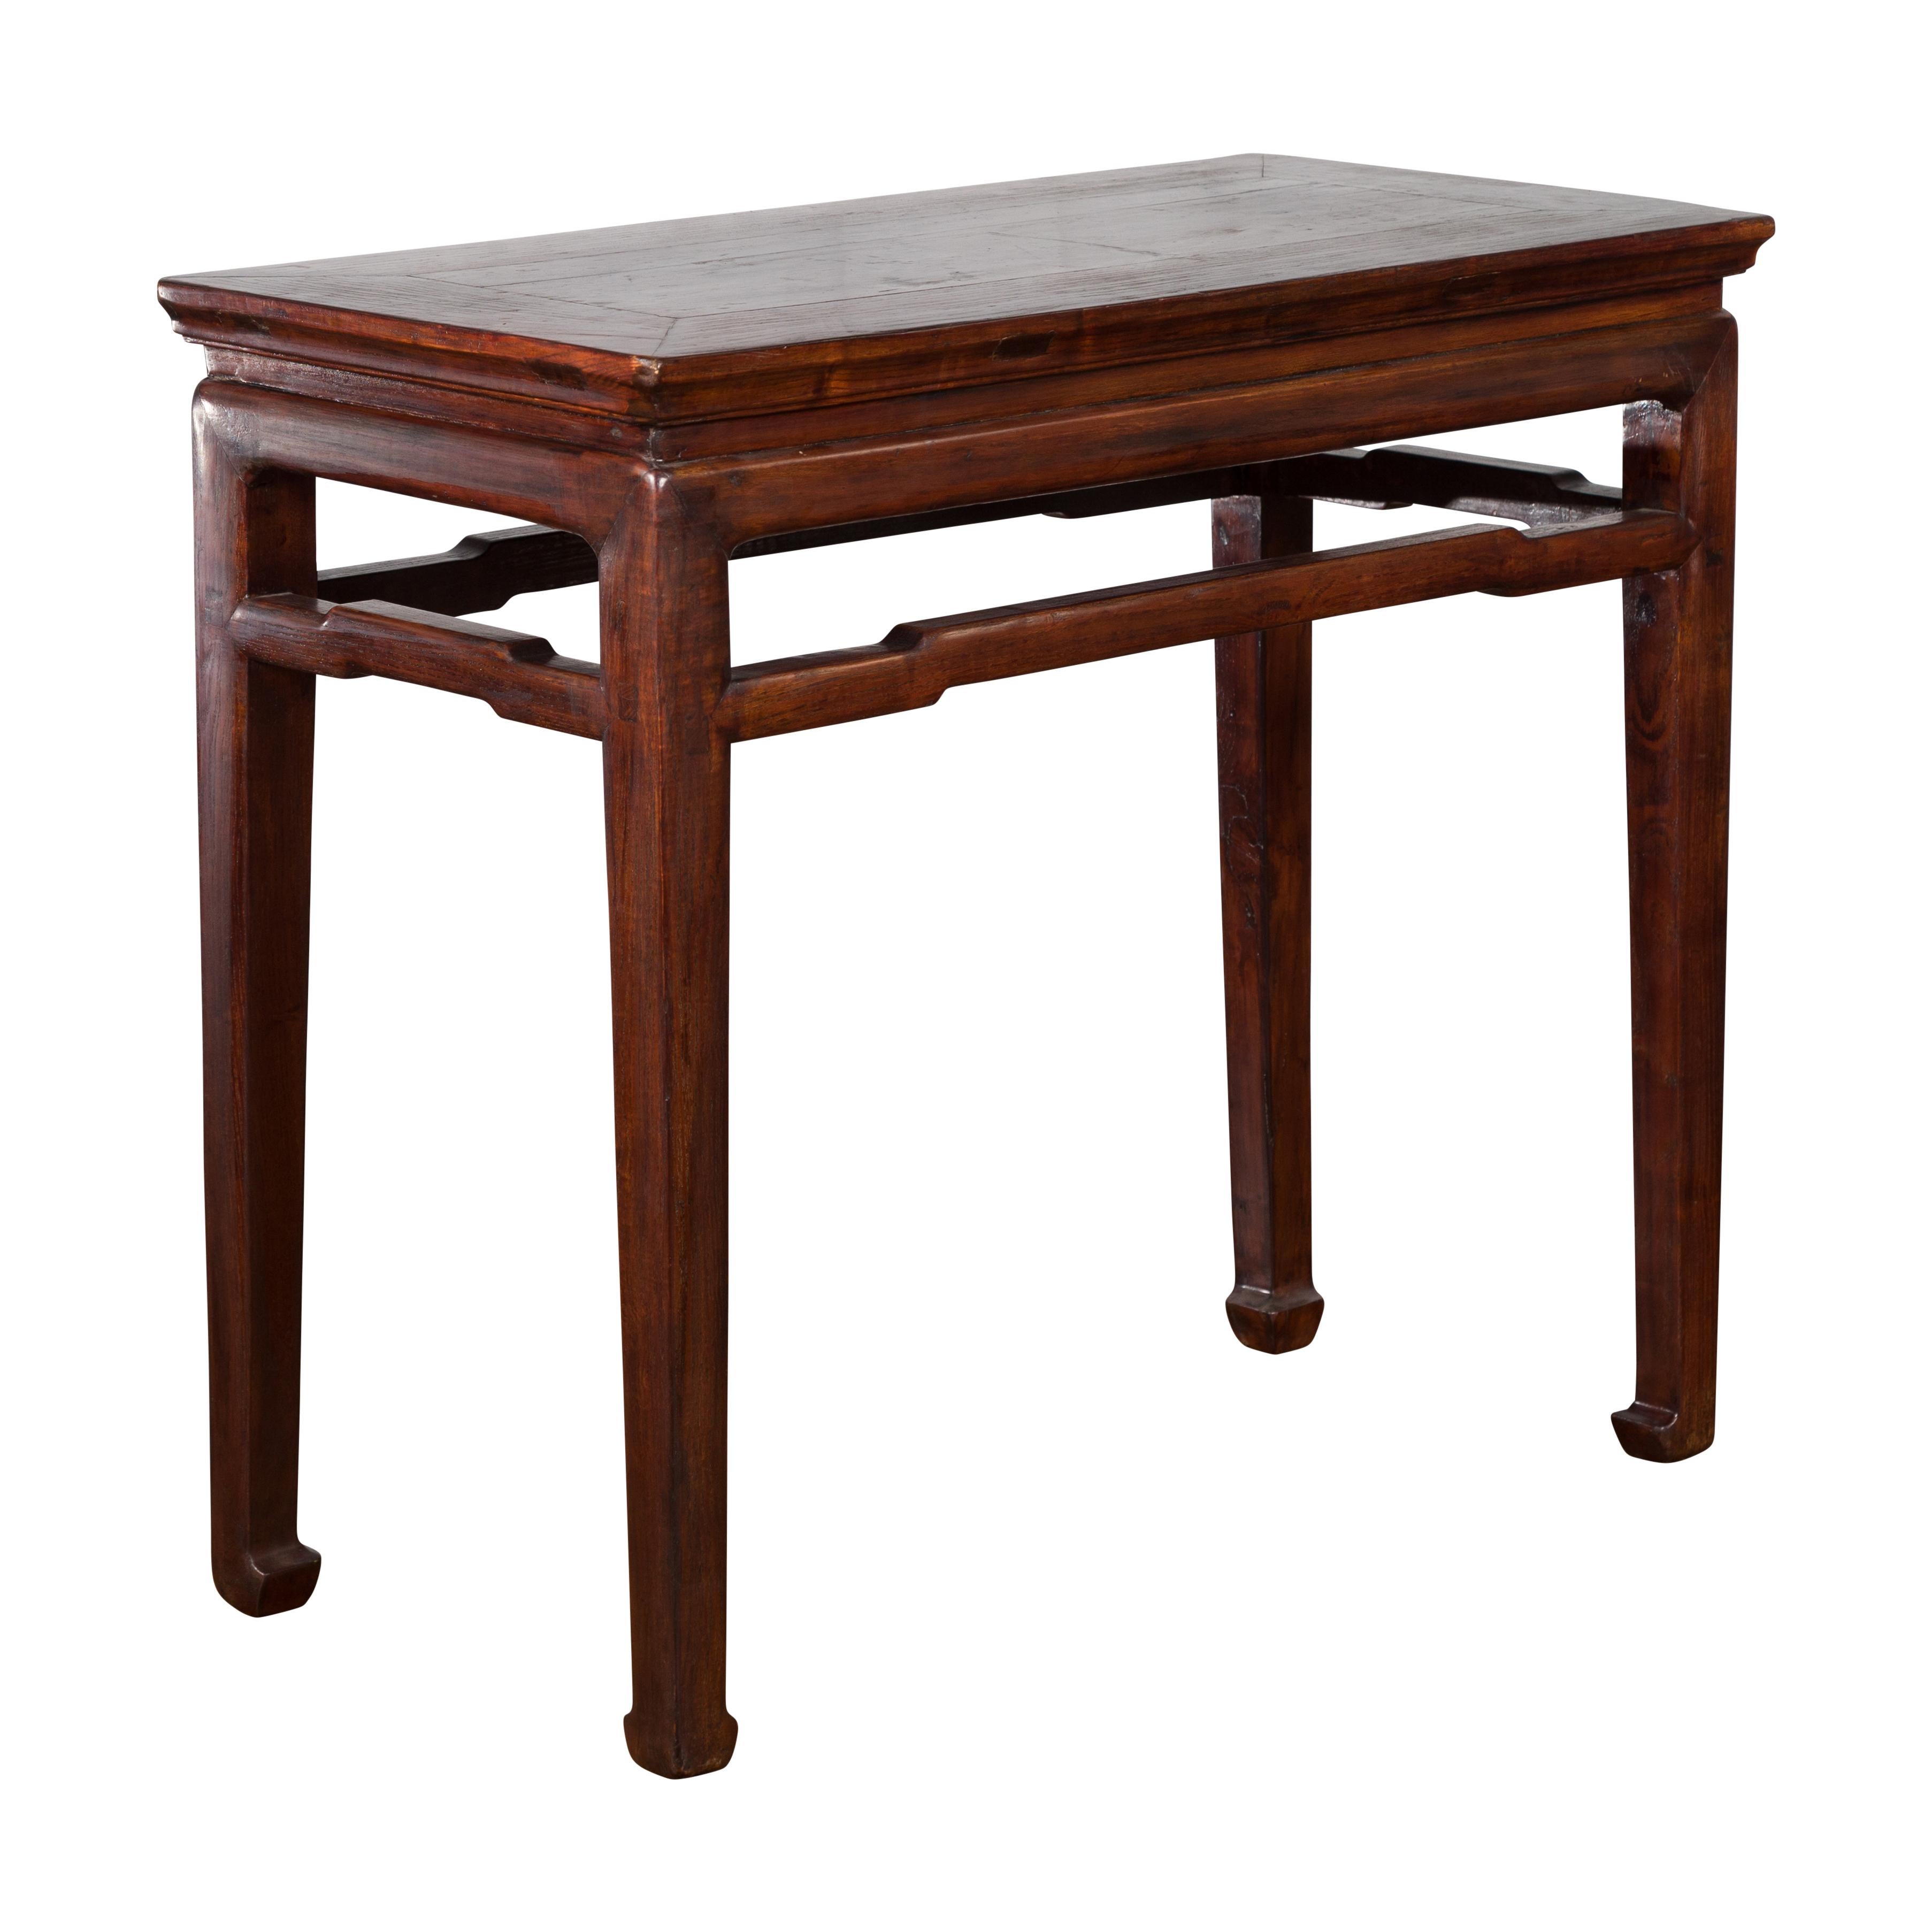 A Chinese Qing Dynasty period Elmwood wine tasting console table from the 19th century, with humpback stretcher and horse hoof feet. Created in China during the Qing Dynasty, this Elmwood wine table features a rectangular top with central board,